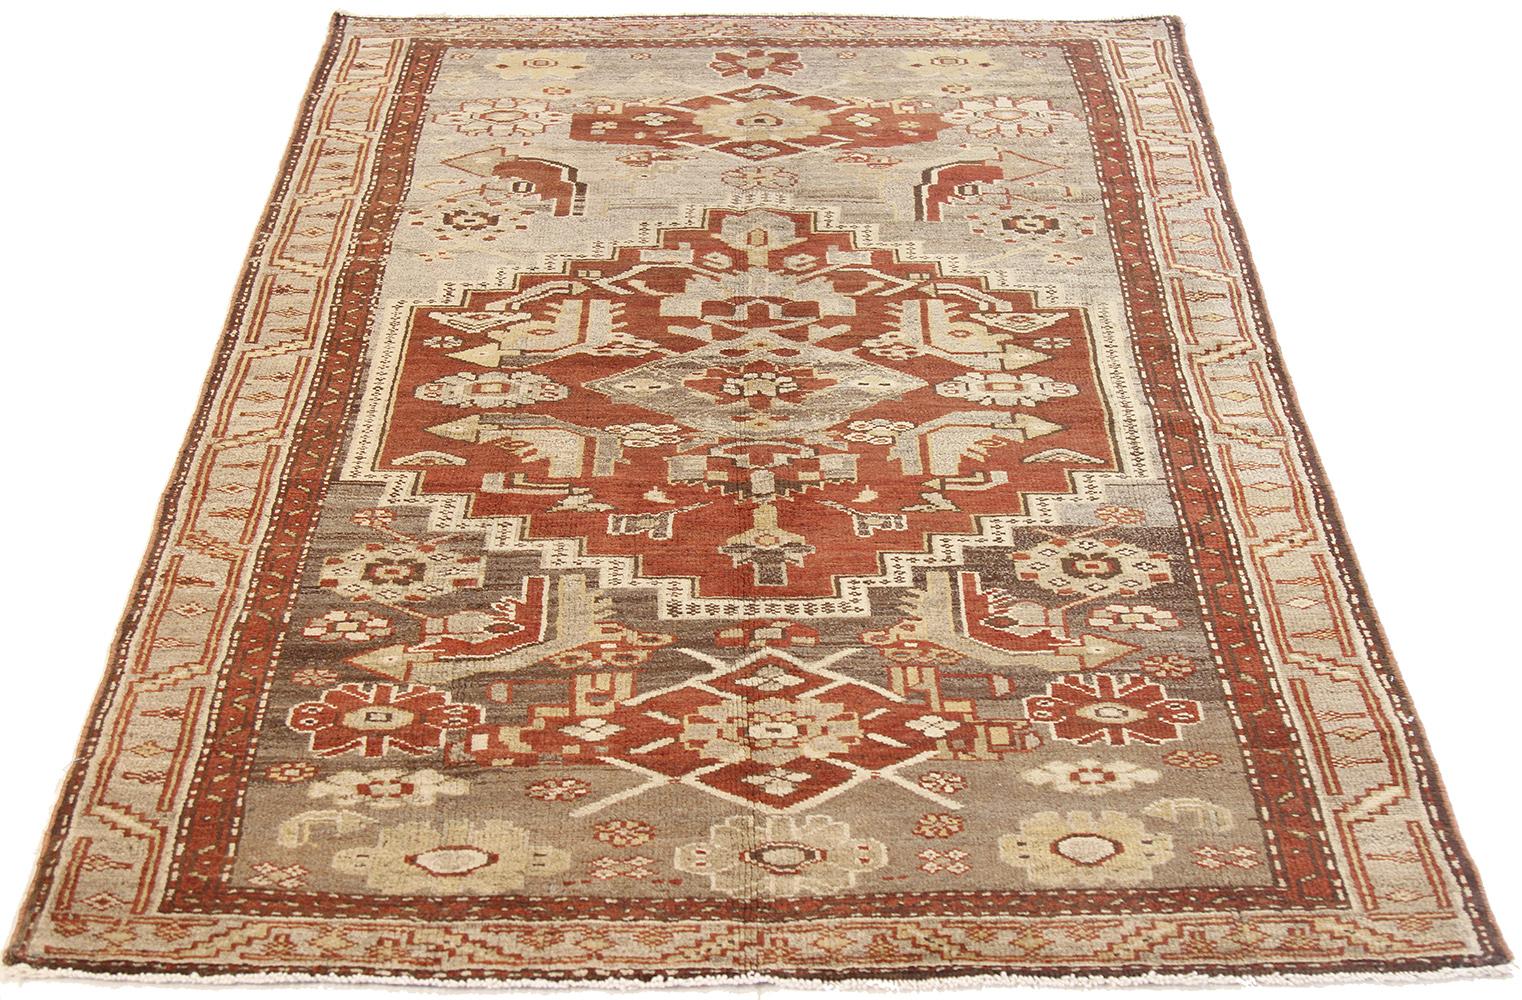 Antique Persian rug handwoven from the finest sheep’s wool and colored with all-natural vegetable dyes that are safe for humans and pets. It’s a traditional Zanjan design featuring geometric tribal details in red and beige on an ivory field. It’s a